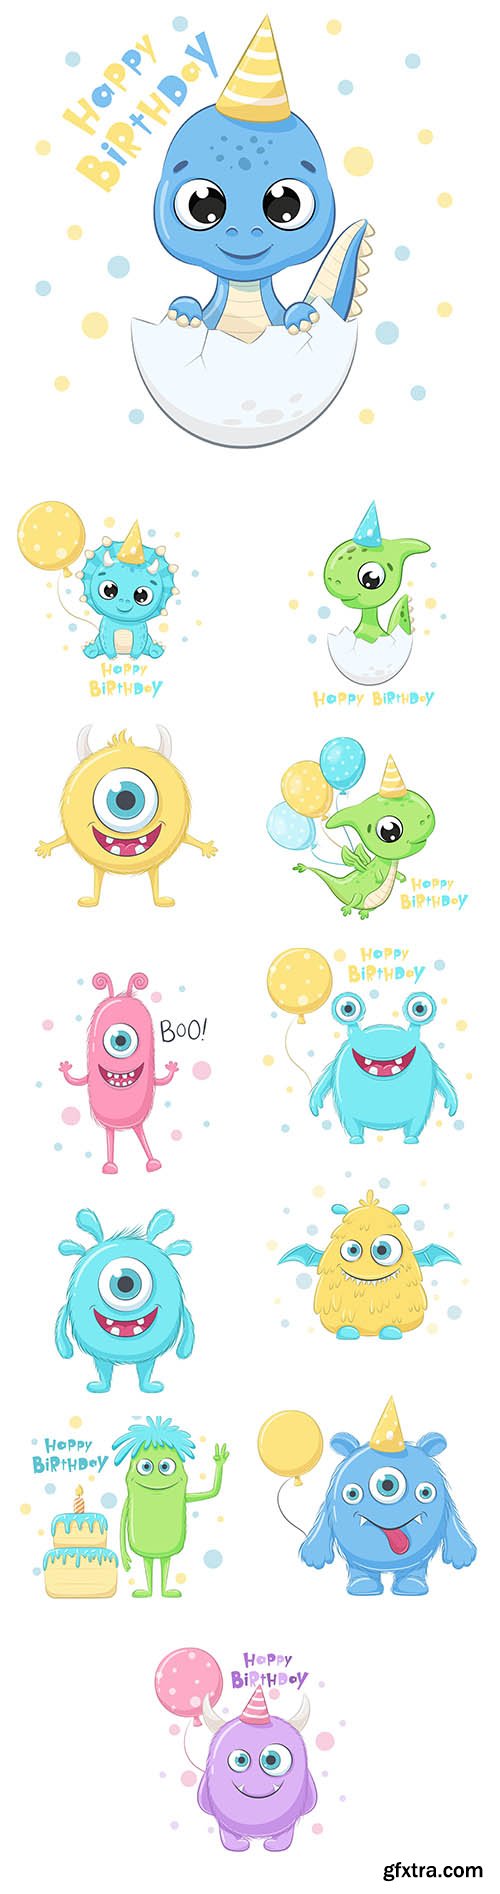 Cute dinosaur with phrase happy birthday and monsters illustration